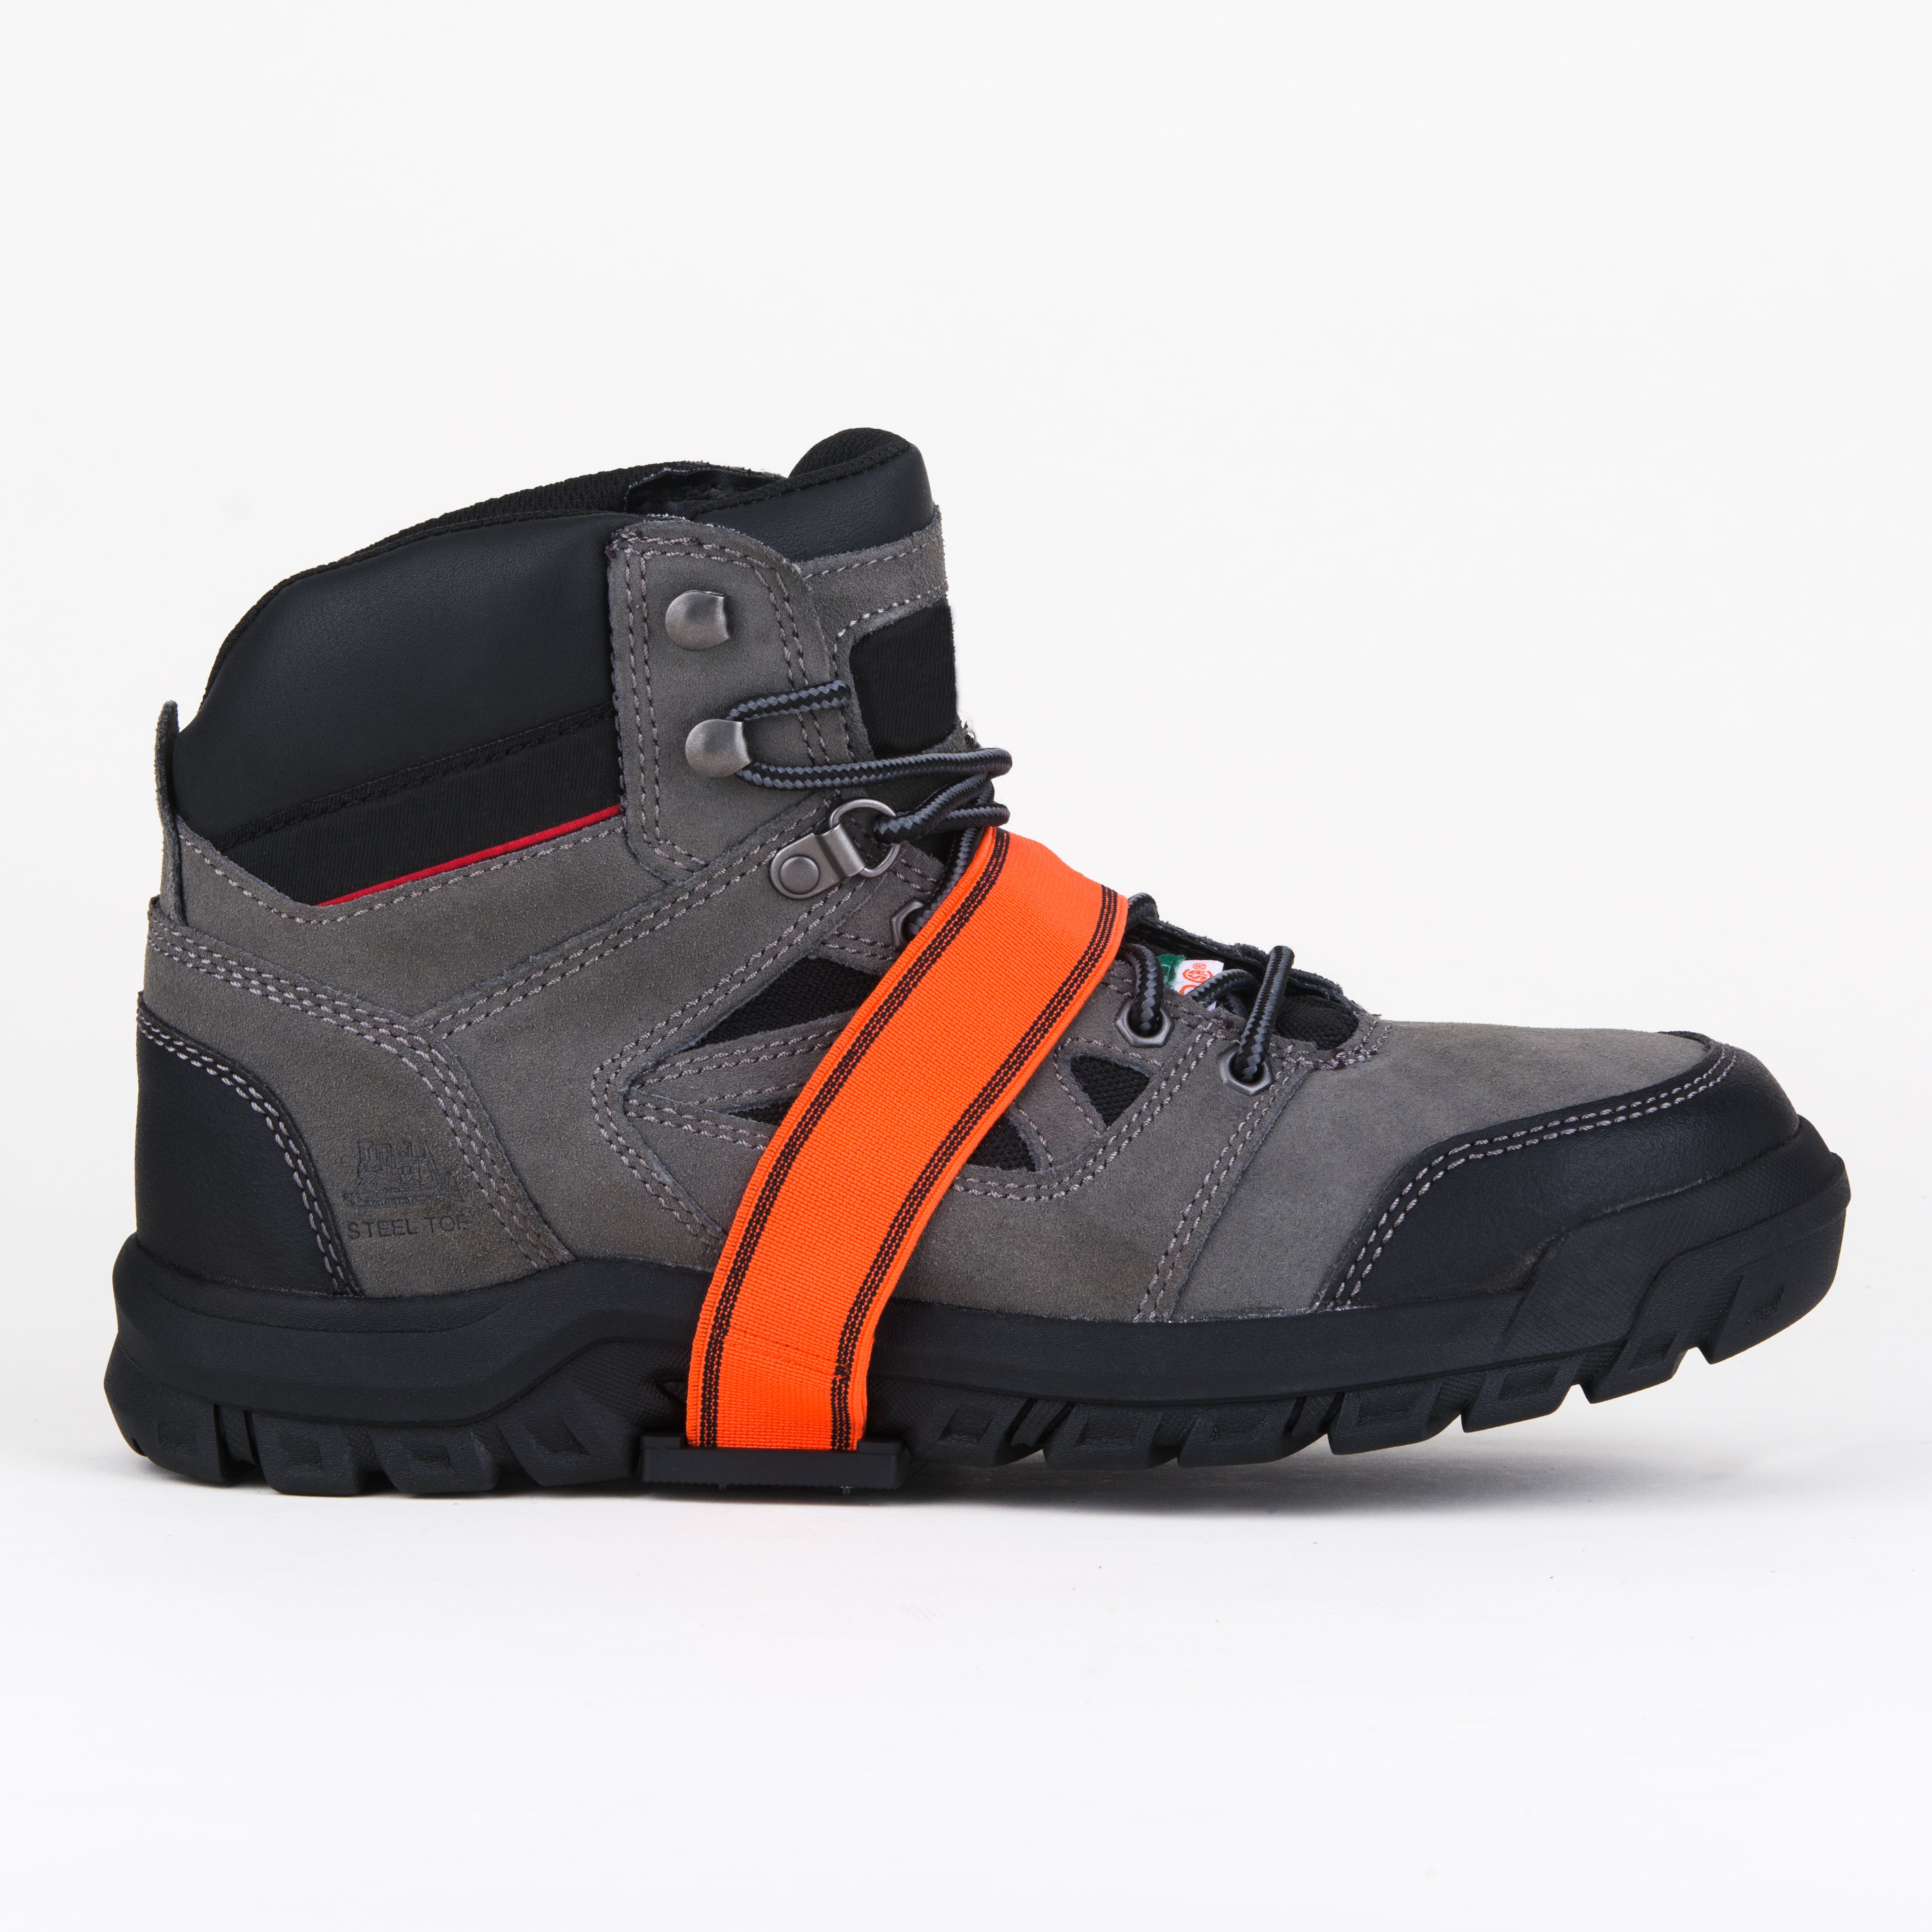 K1 Series Mid-Sole Low Profile Hi-Vis Ice Cleat (For Work Boots & Safety Shoes) Work Boots - Cleanflow